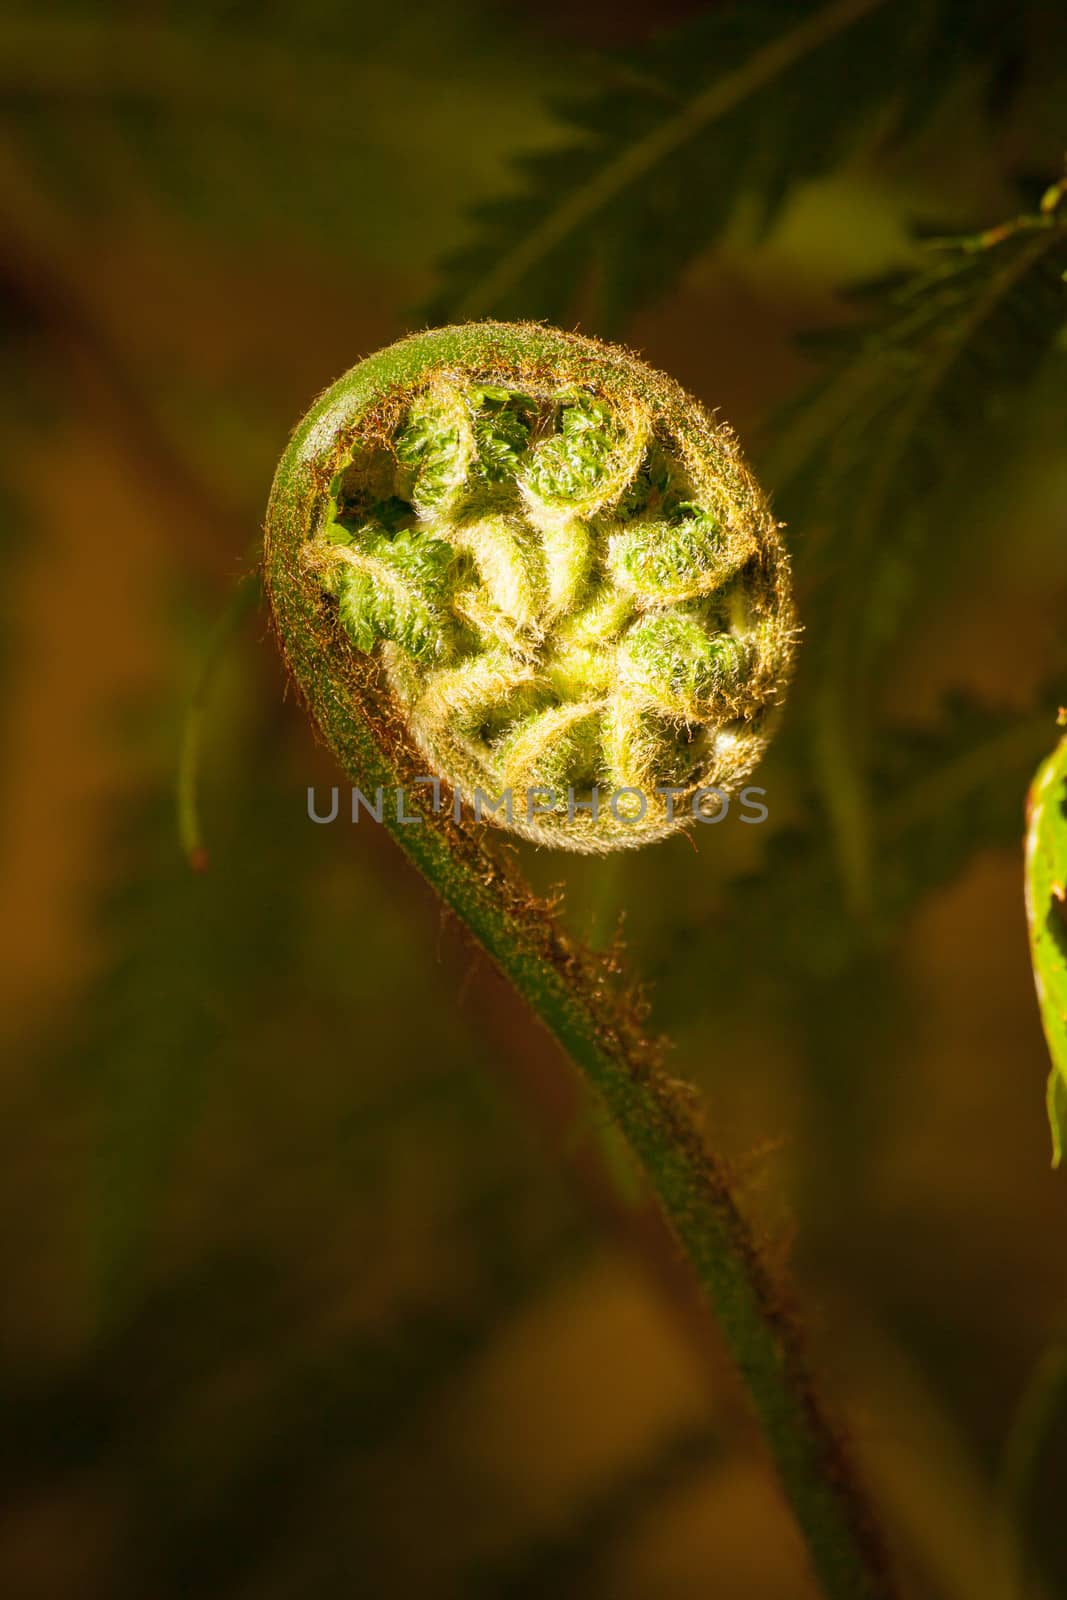 Newly formed fern leaf in the process of rolling out.